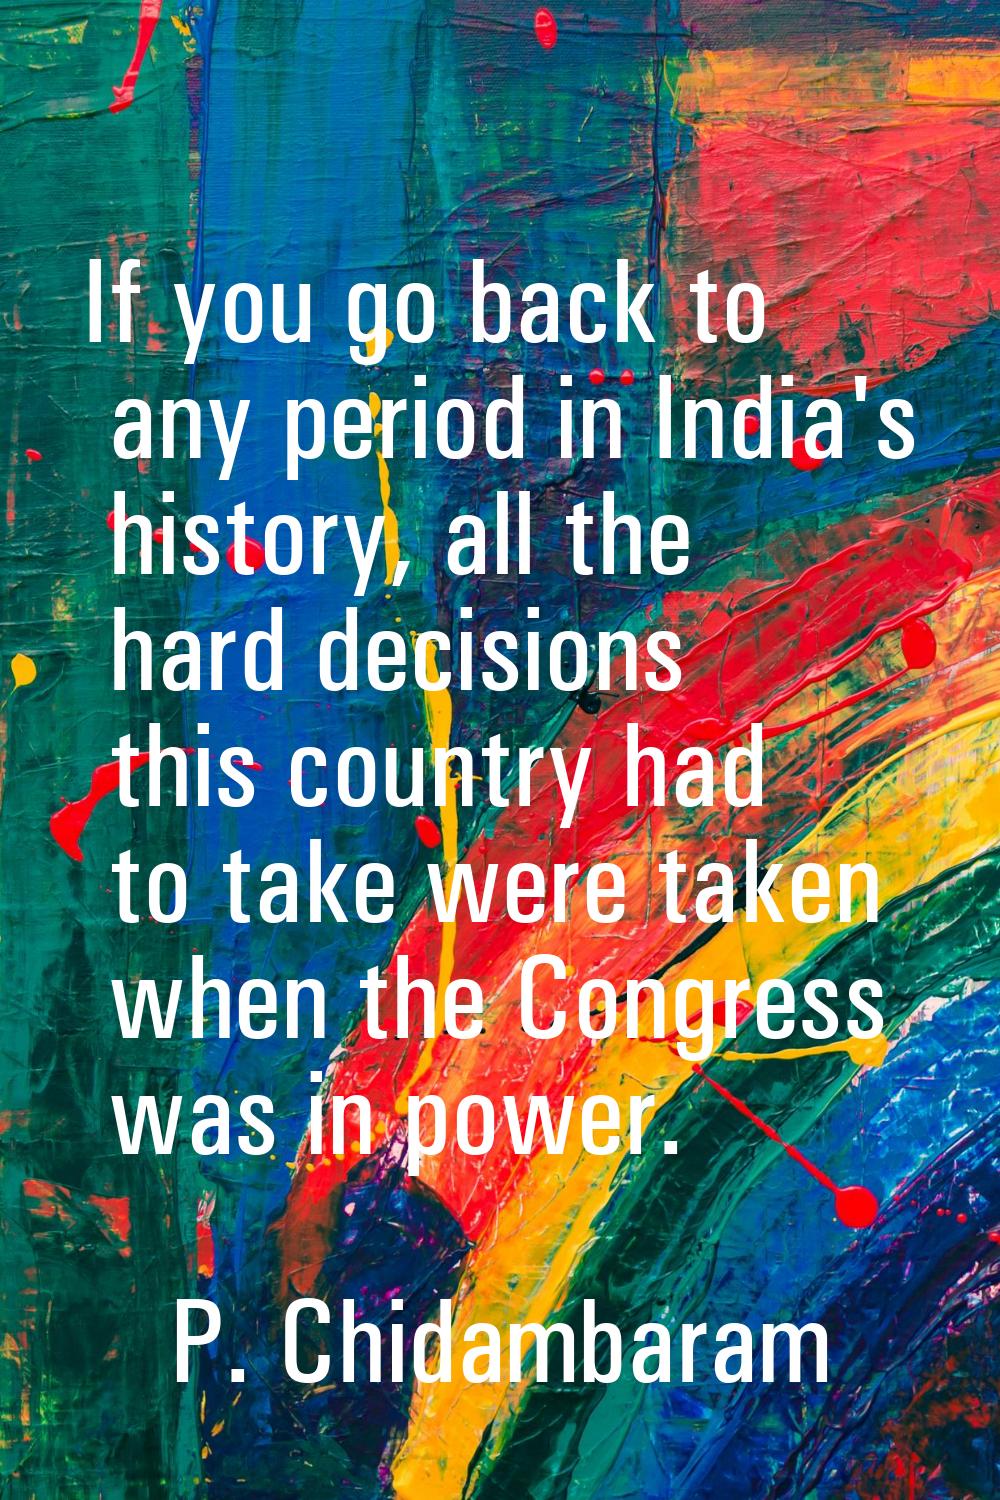 If you go back to any period in India's history, all the hard decisions this country had to take we